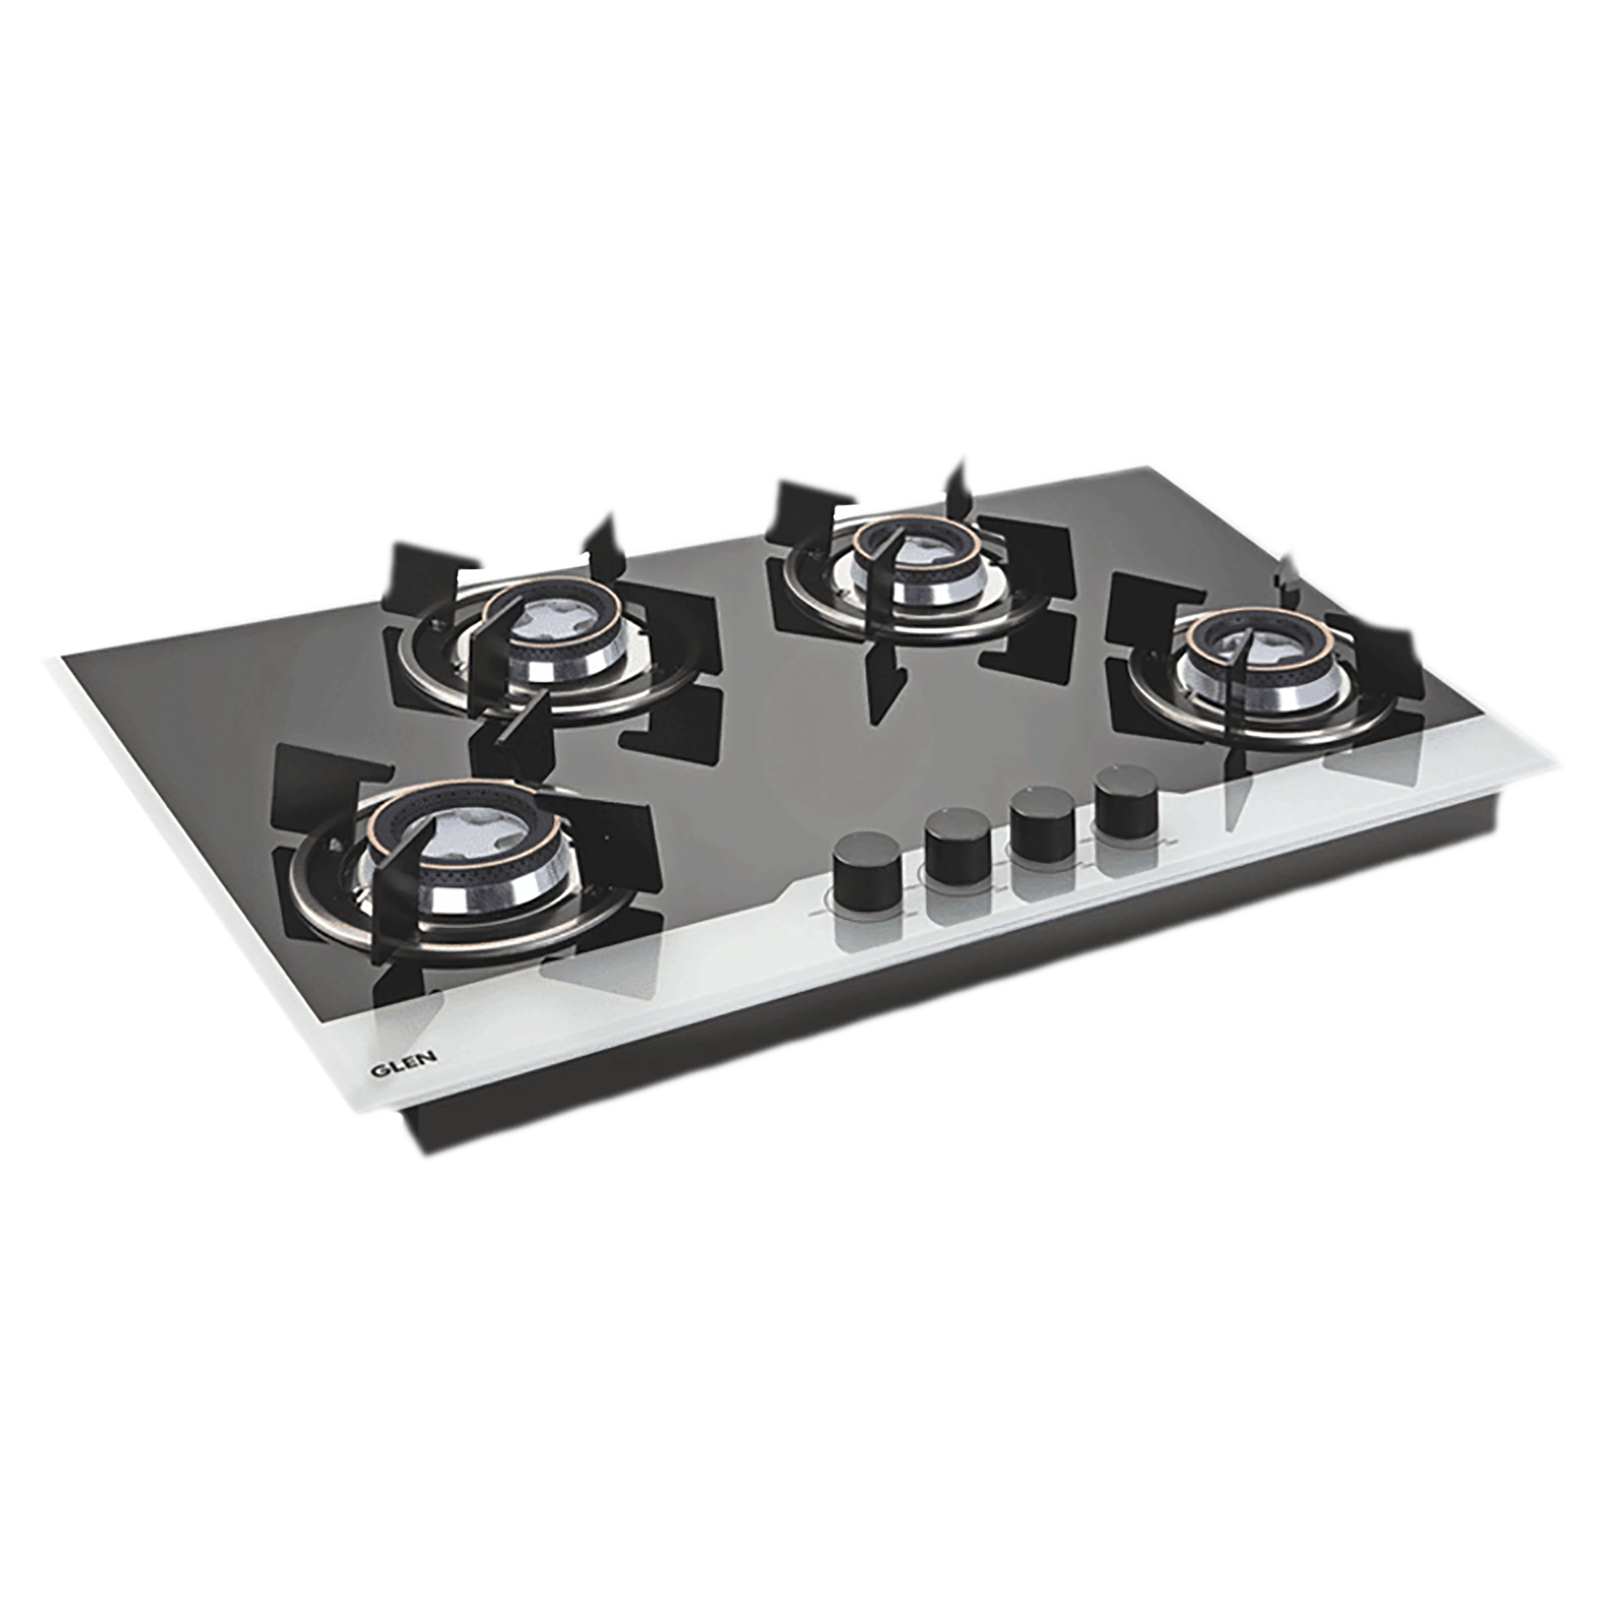 Glen 1074 HT BW Toughened Glass Top 4 Burner Automatic Electric Hob (Battery Operated, Black/White)